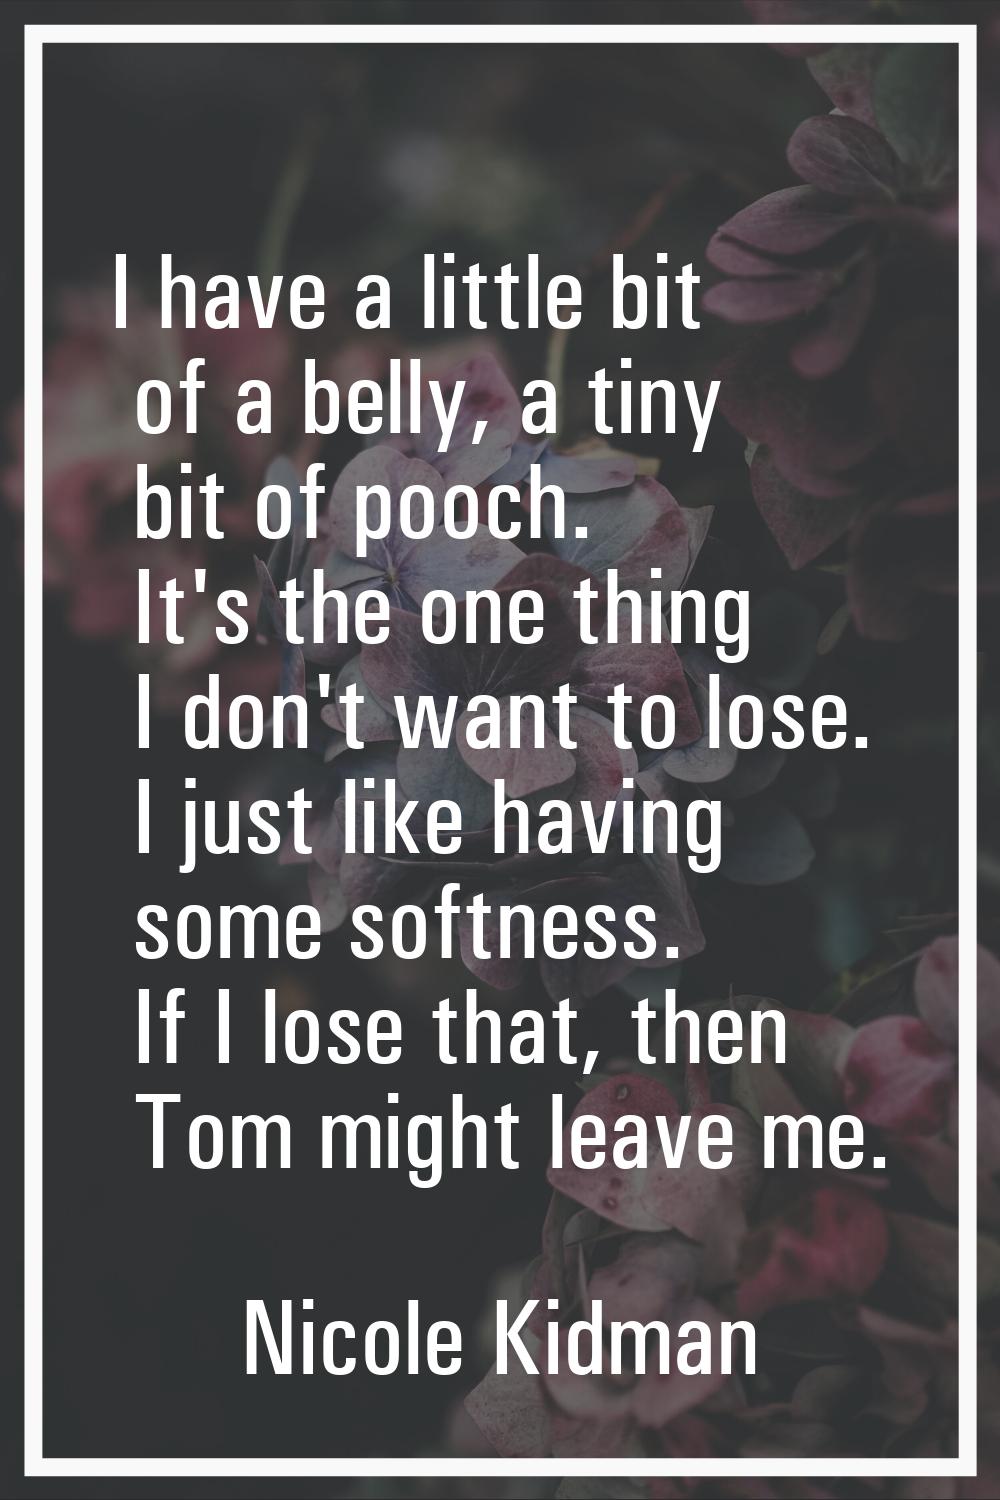 I have a little bit of a belly, a tiny bit of pooch. It's the one thing I don't want to lose. I jus